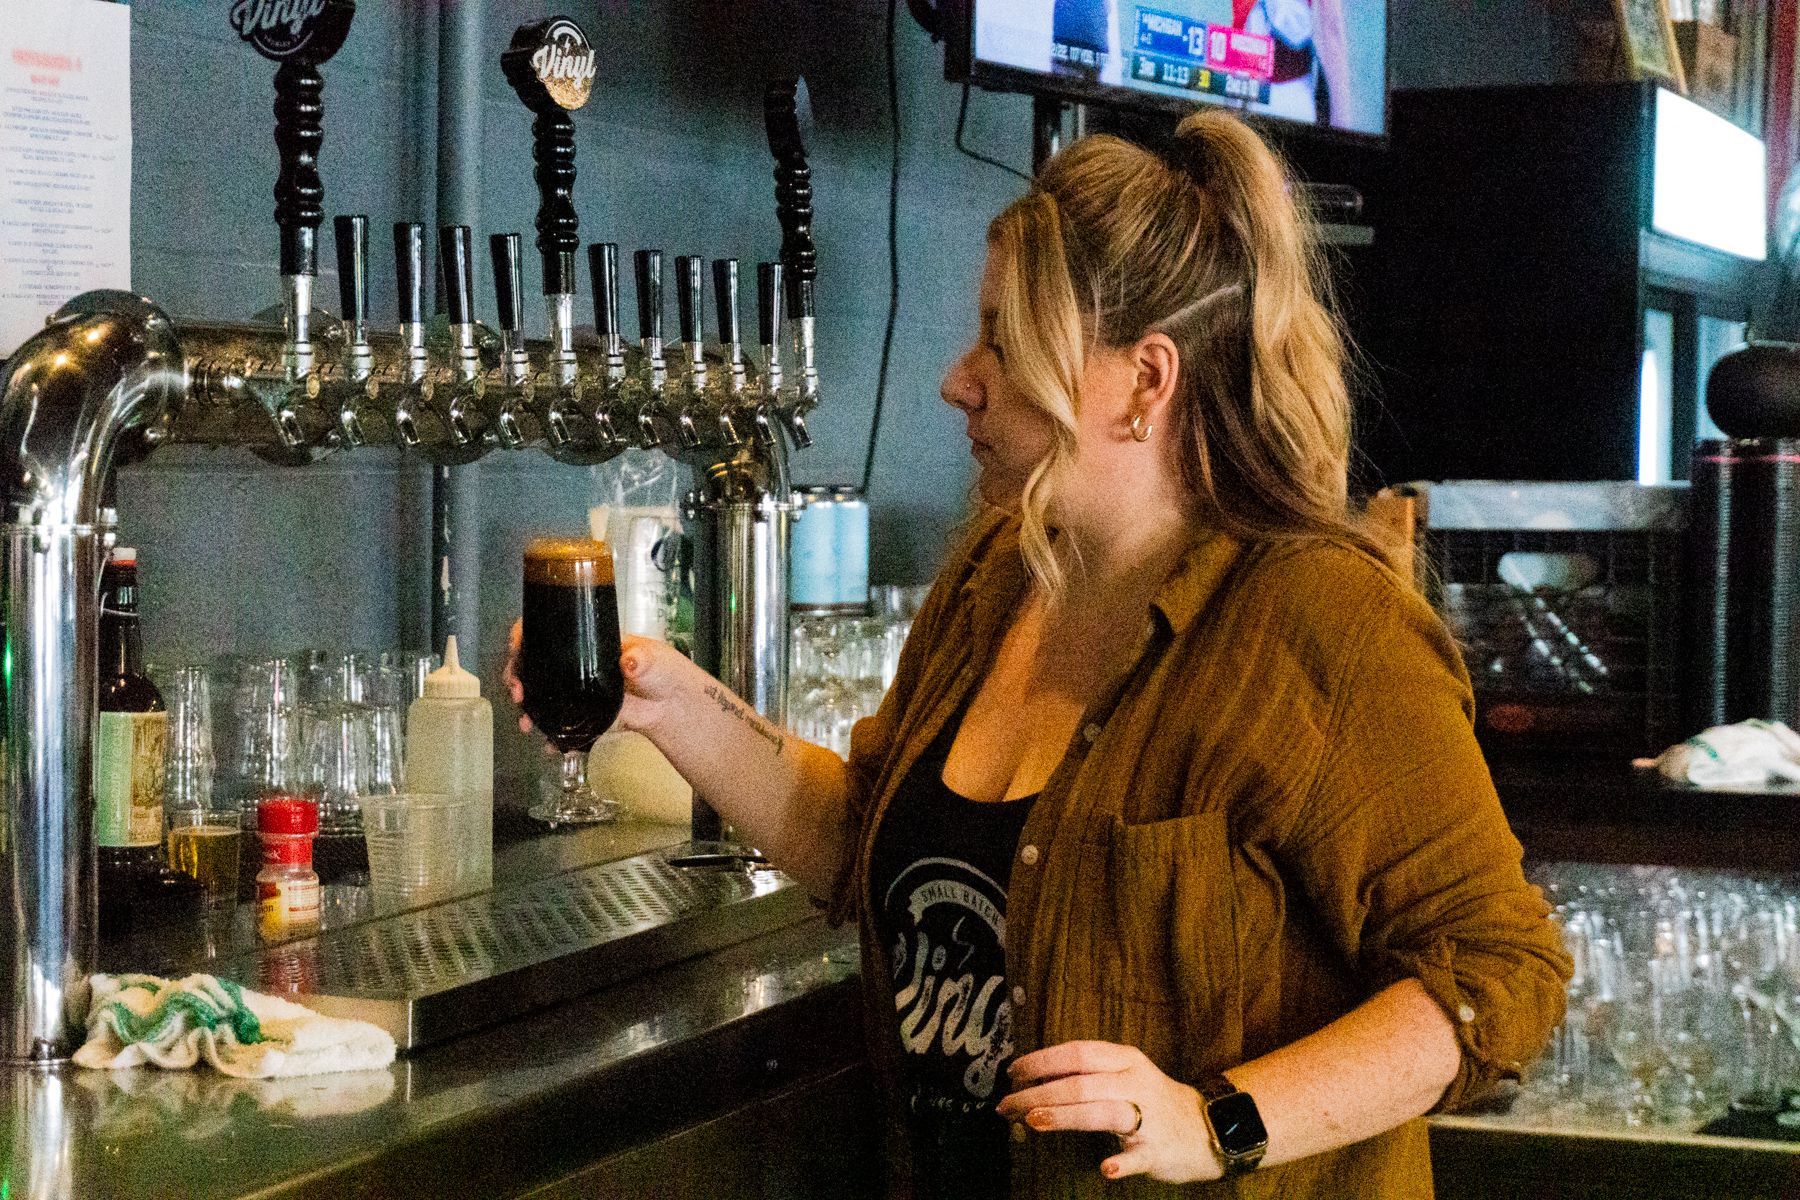 Kylene pouring a stout during Vinyl Brewing's VinylMania event in 2021